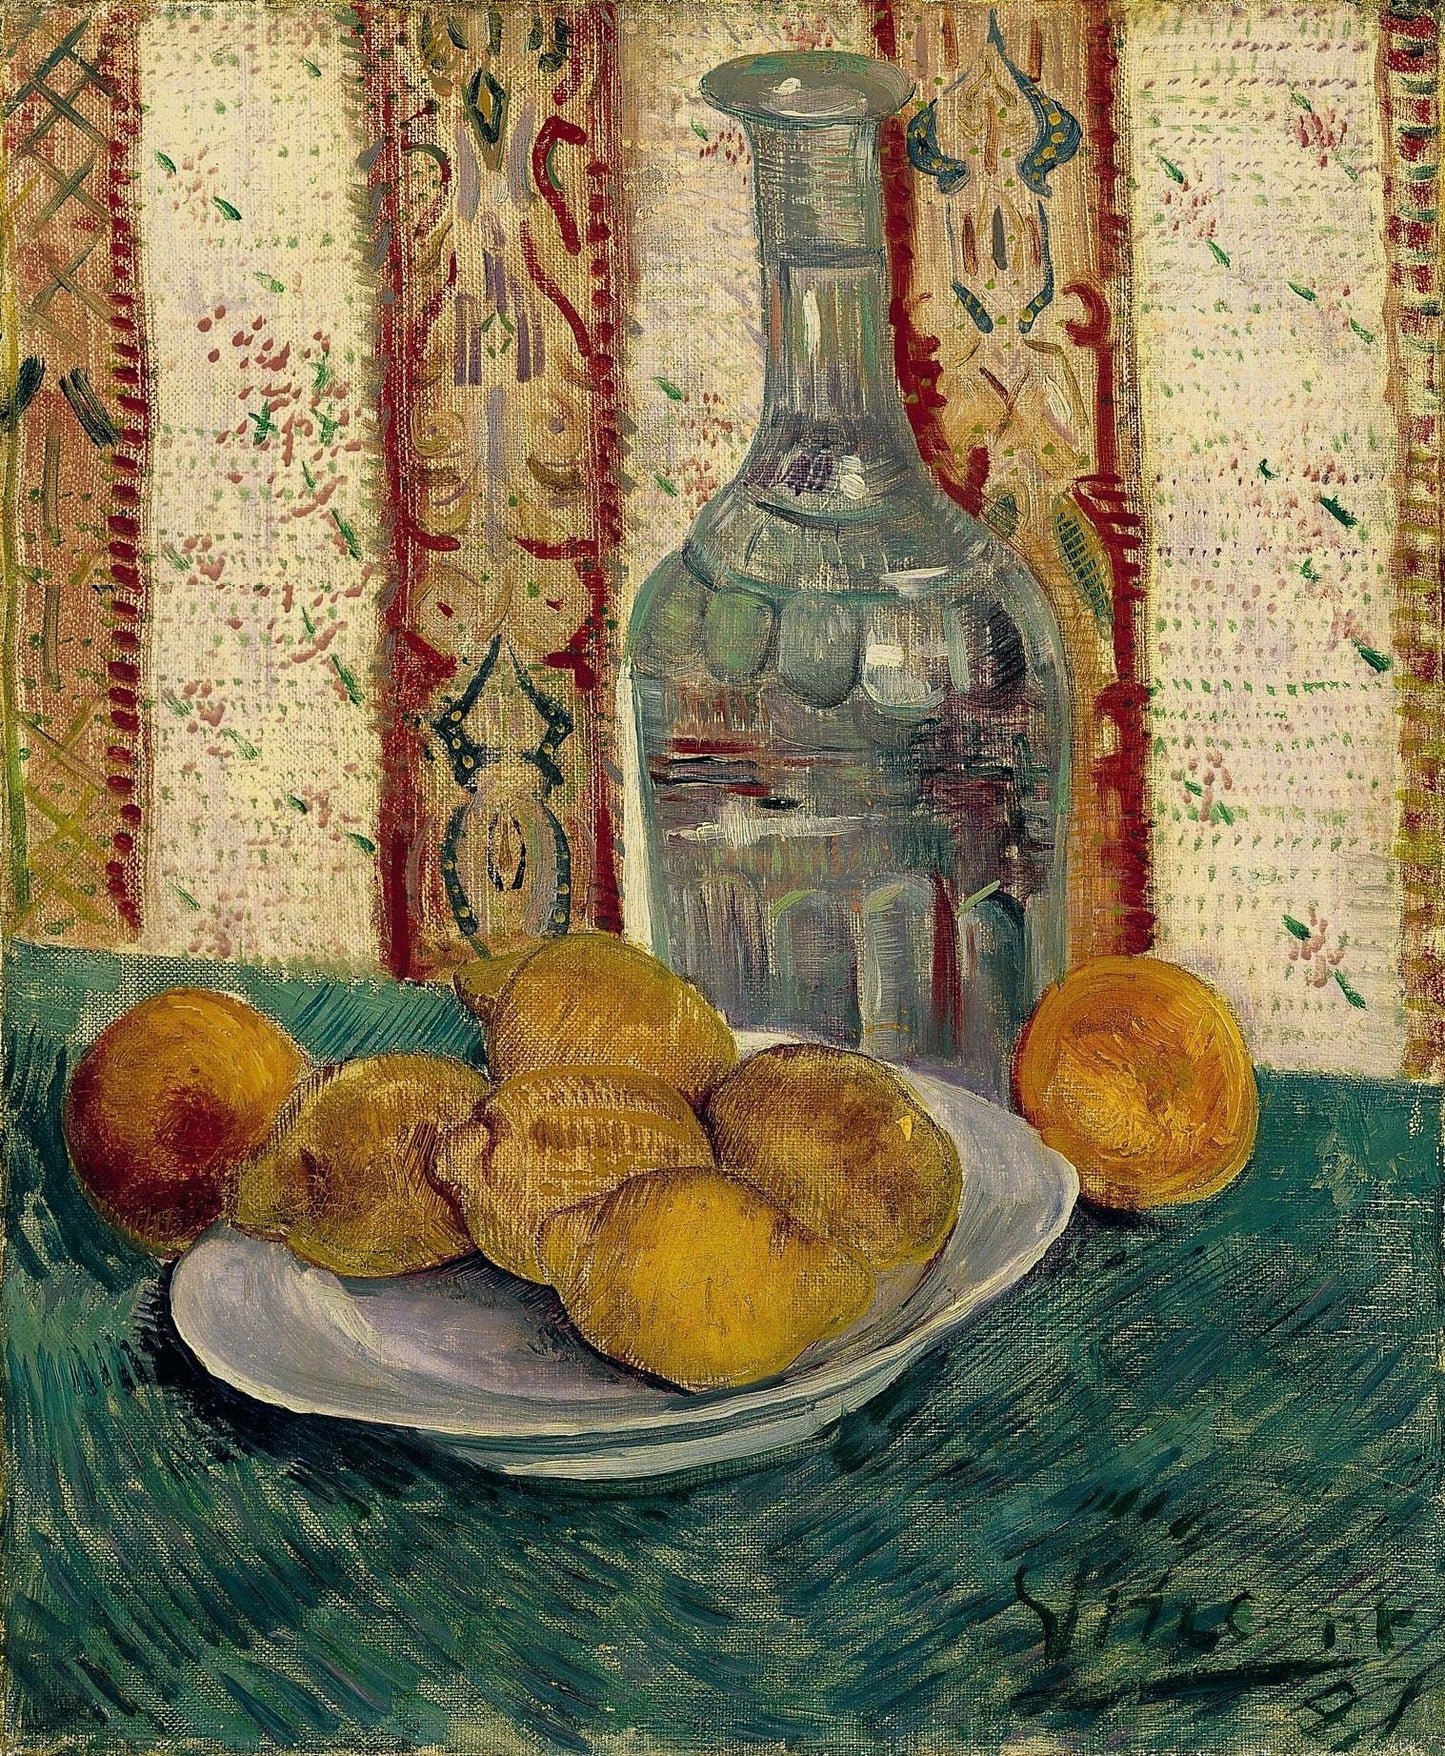 Still Life with Decanter and Lemons on a Plate, 1887